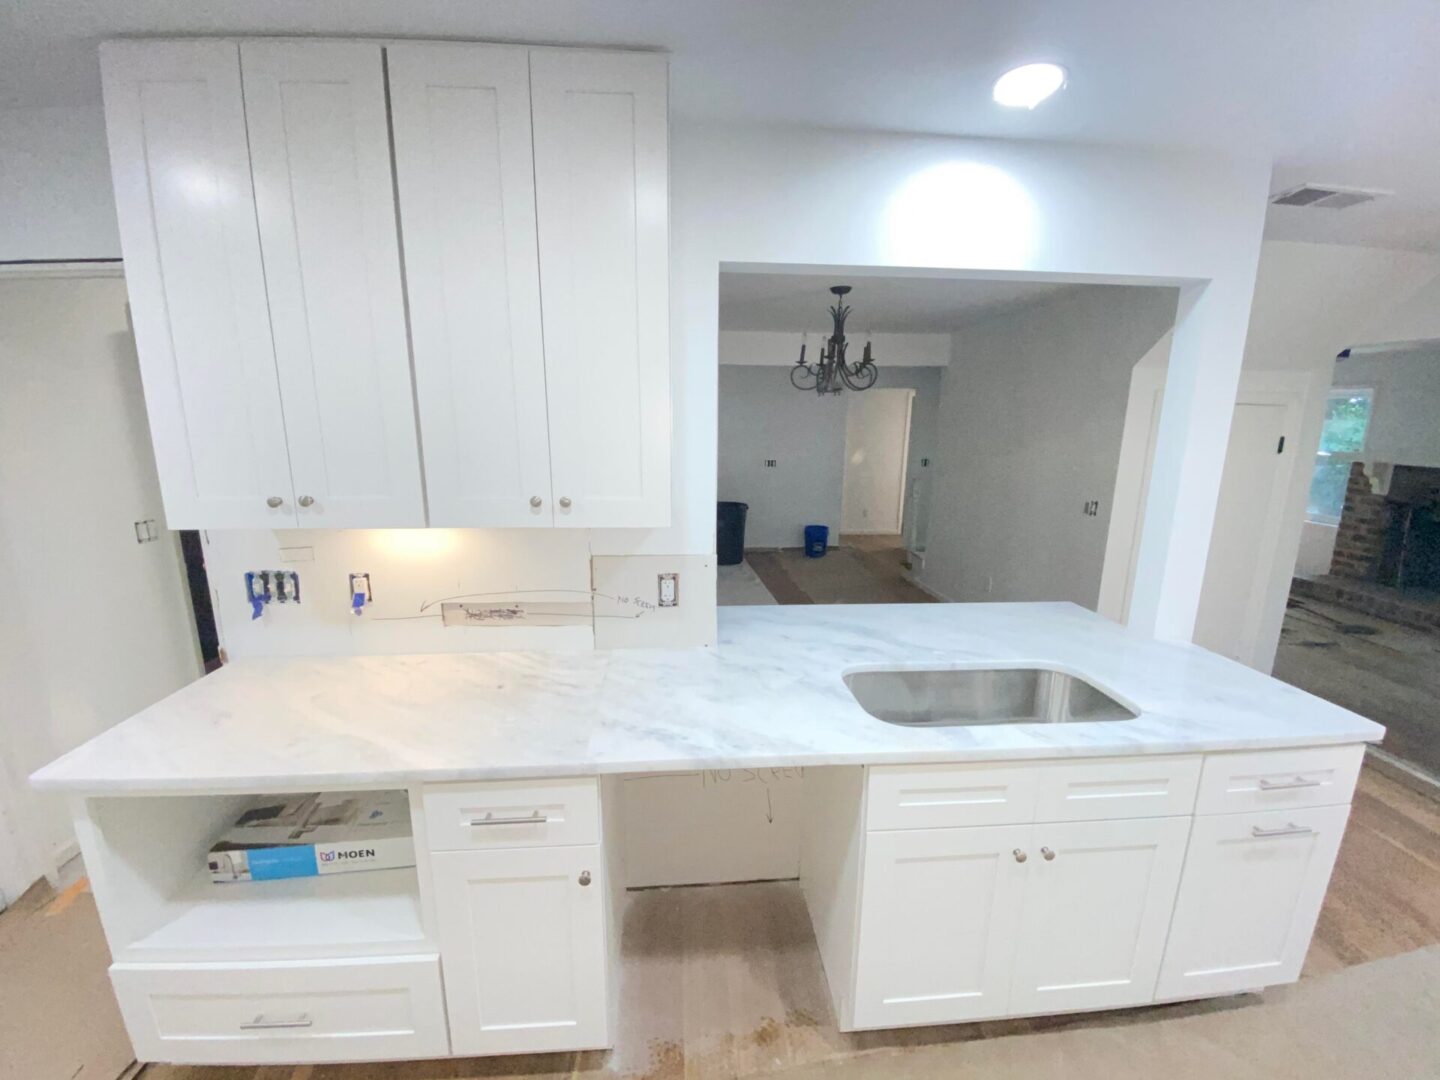 View of the kitchen platform and white cabinets